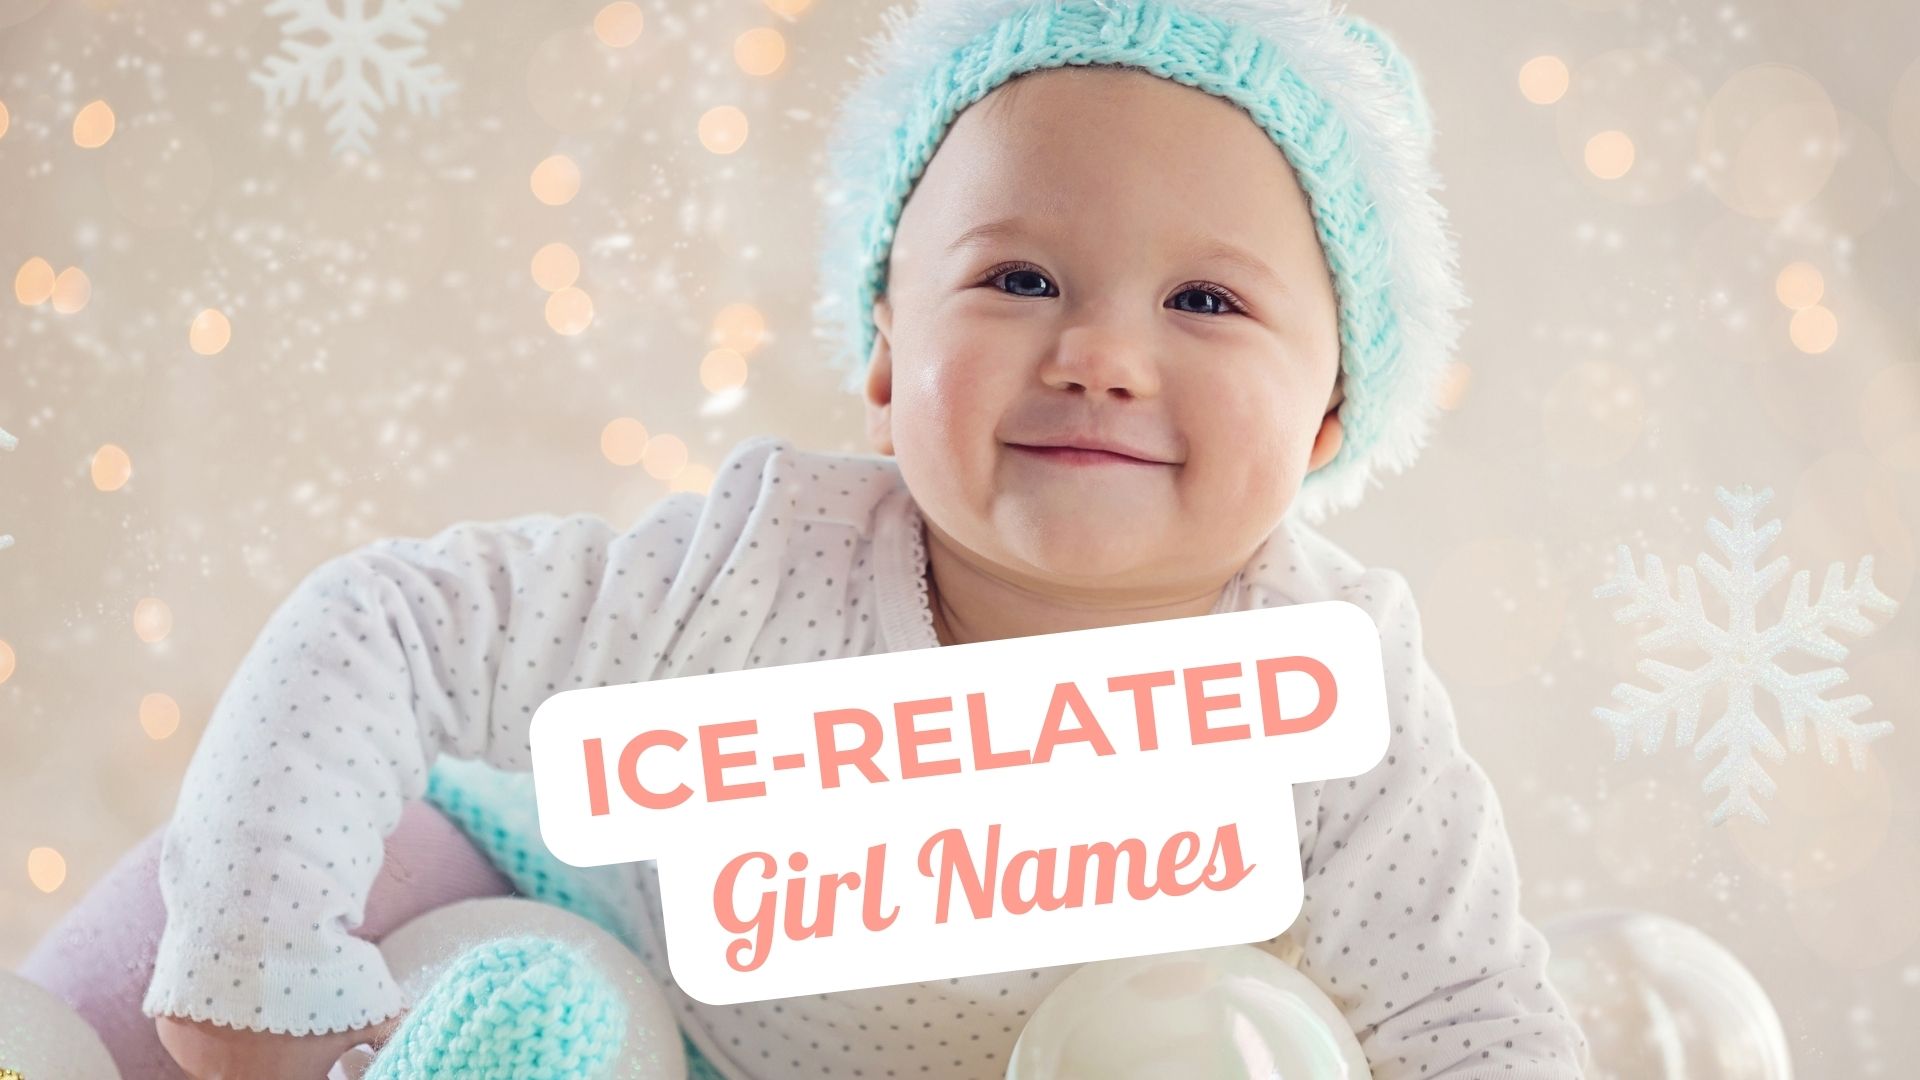 Beautiful Ice-Related Baby Girl Names for Your Princess